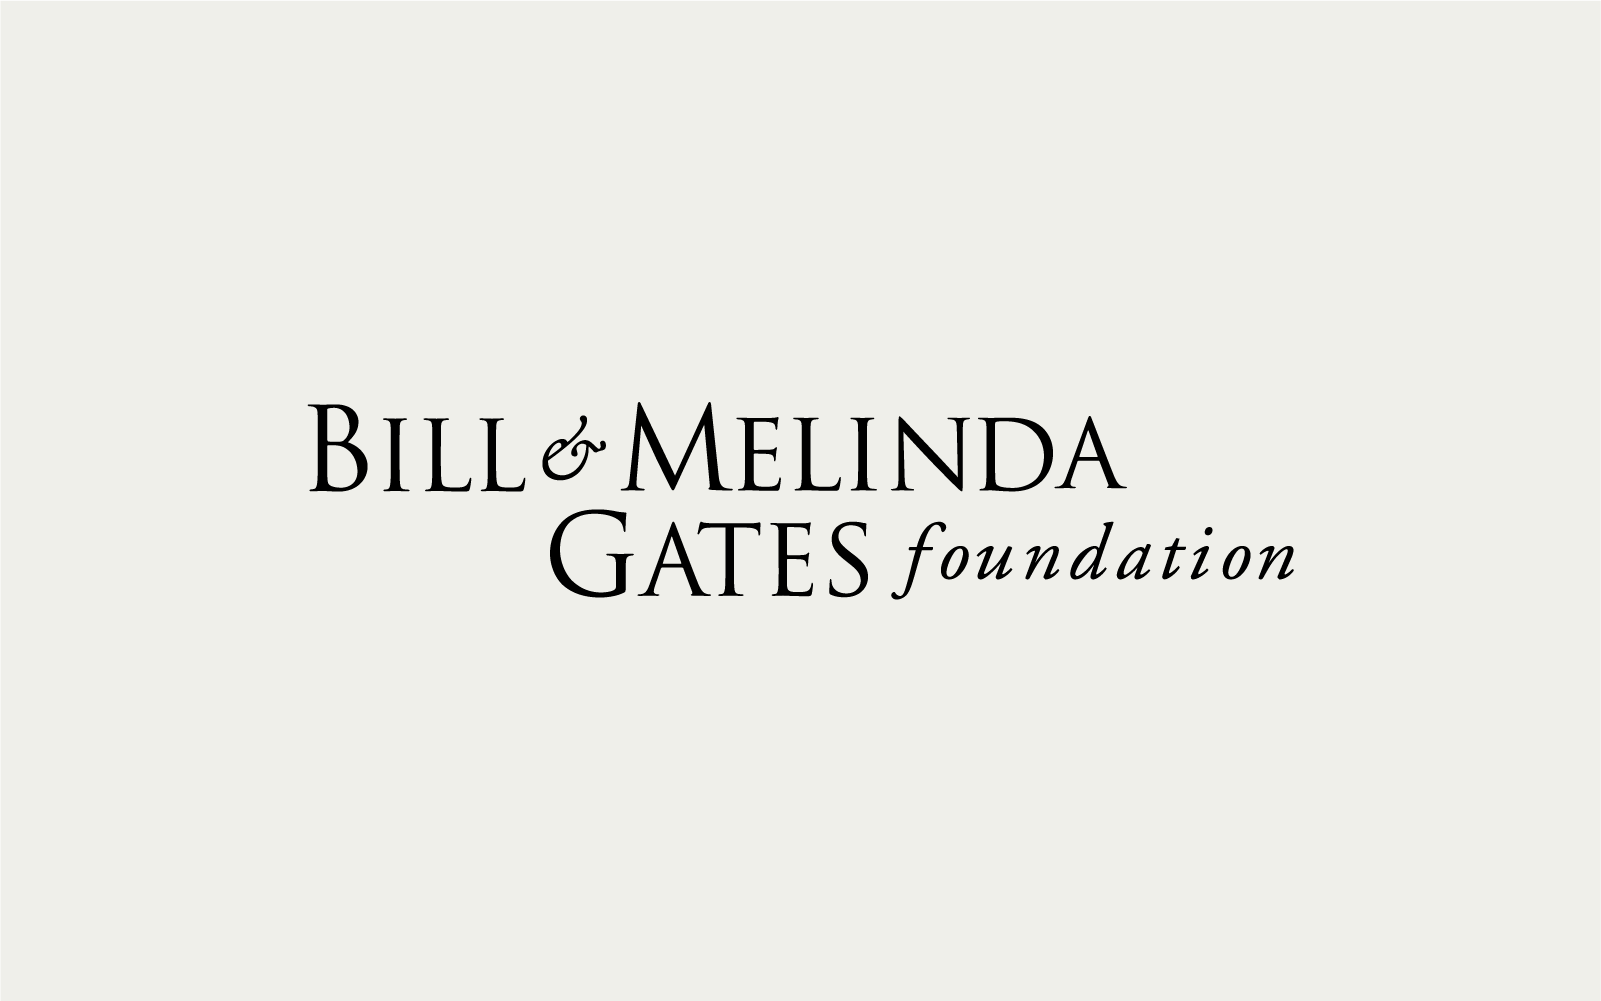 Gates Foundation Expands Commitment to COVID-19 Response, Calls for International Collaboration